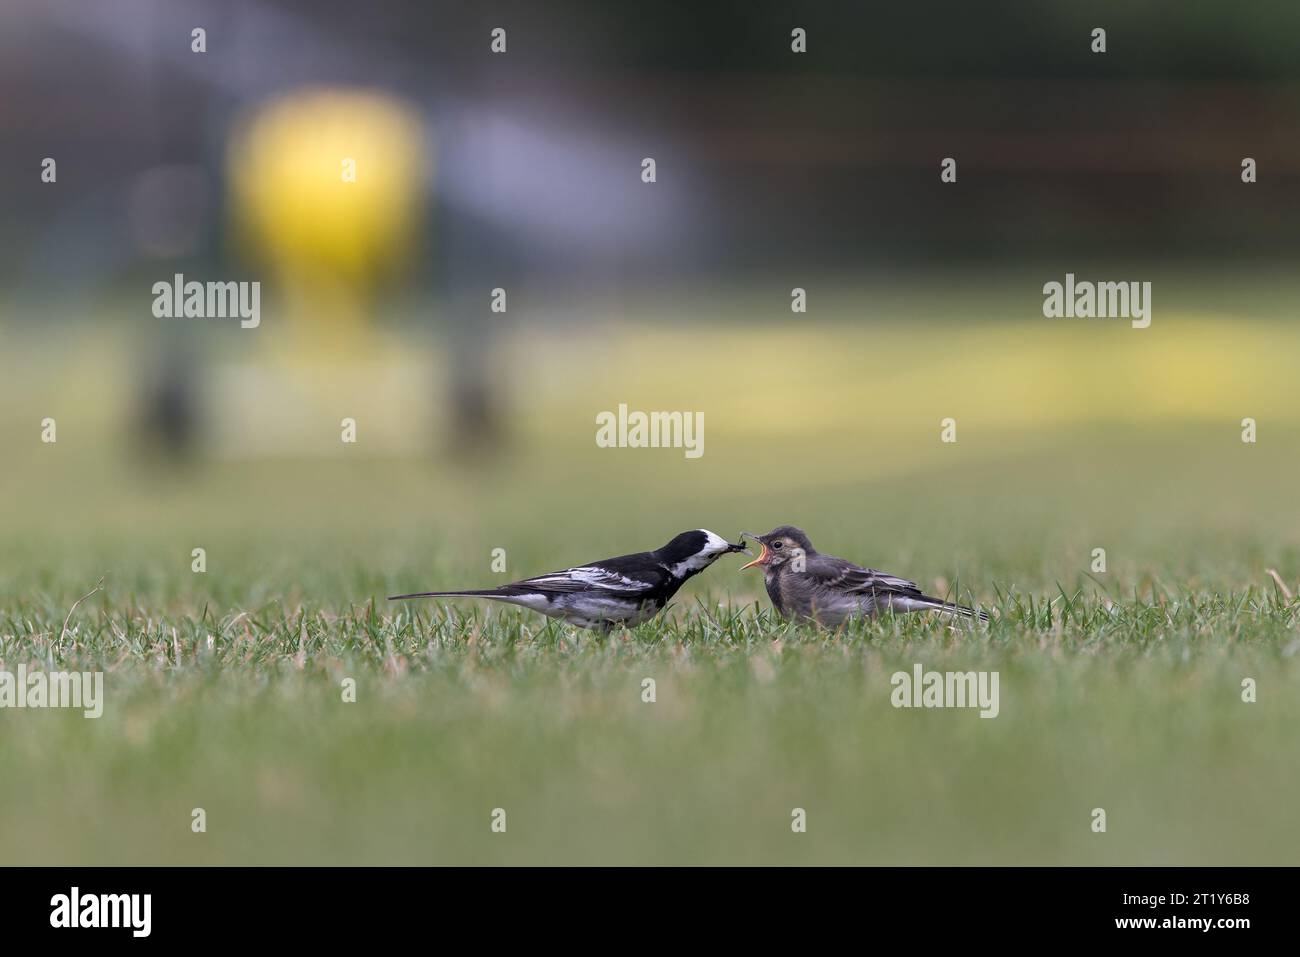 Pied Wagtail [ Motacilla alba ] on lawn with insect in its beak / bill feeding juvenile bird Stock Photo